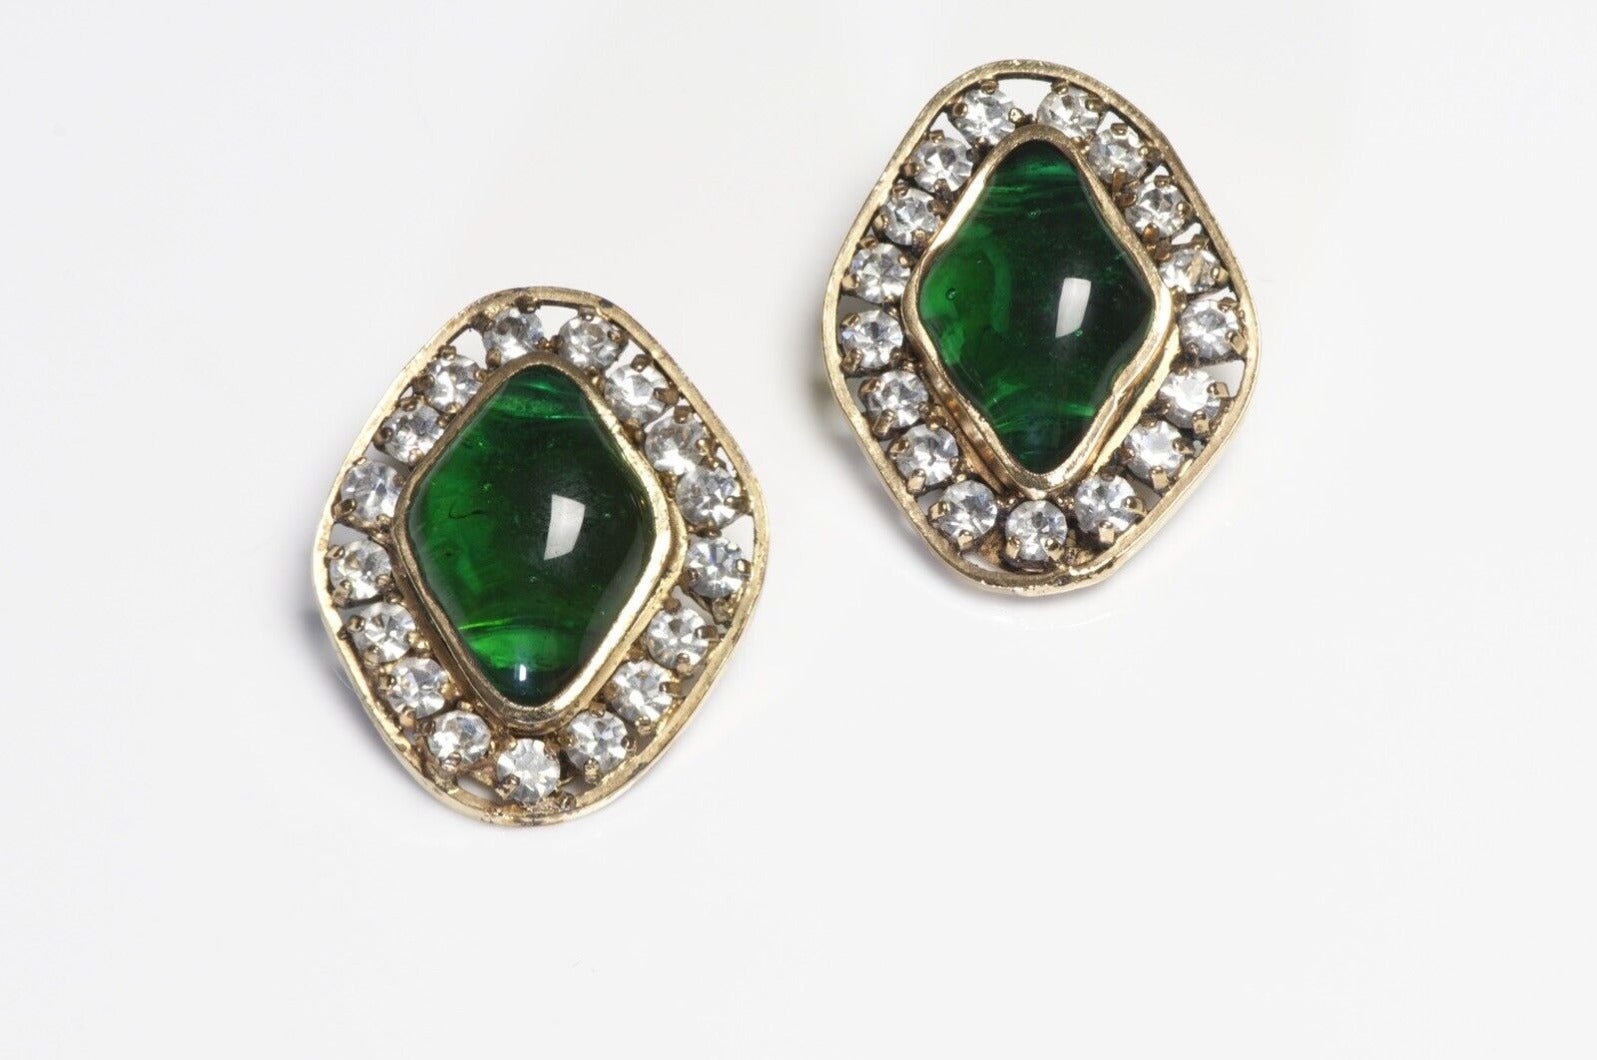 CHANEL Paris Maison Gripoix Green Poured Glass Crystal Earrings - DSF Antique Jewelry